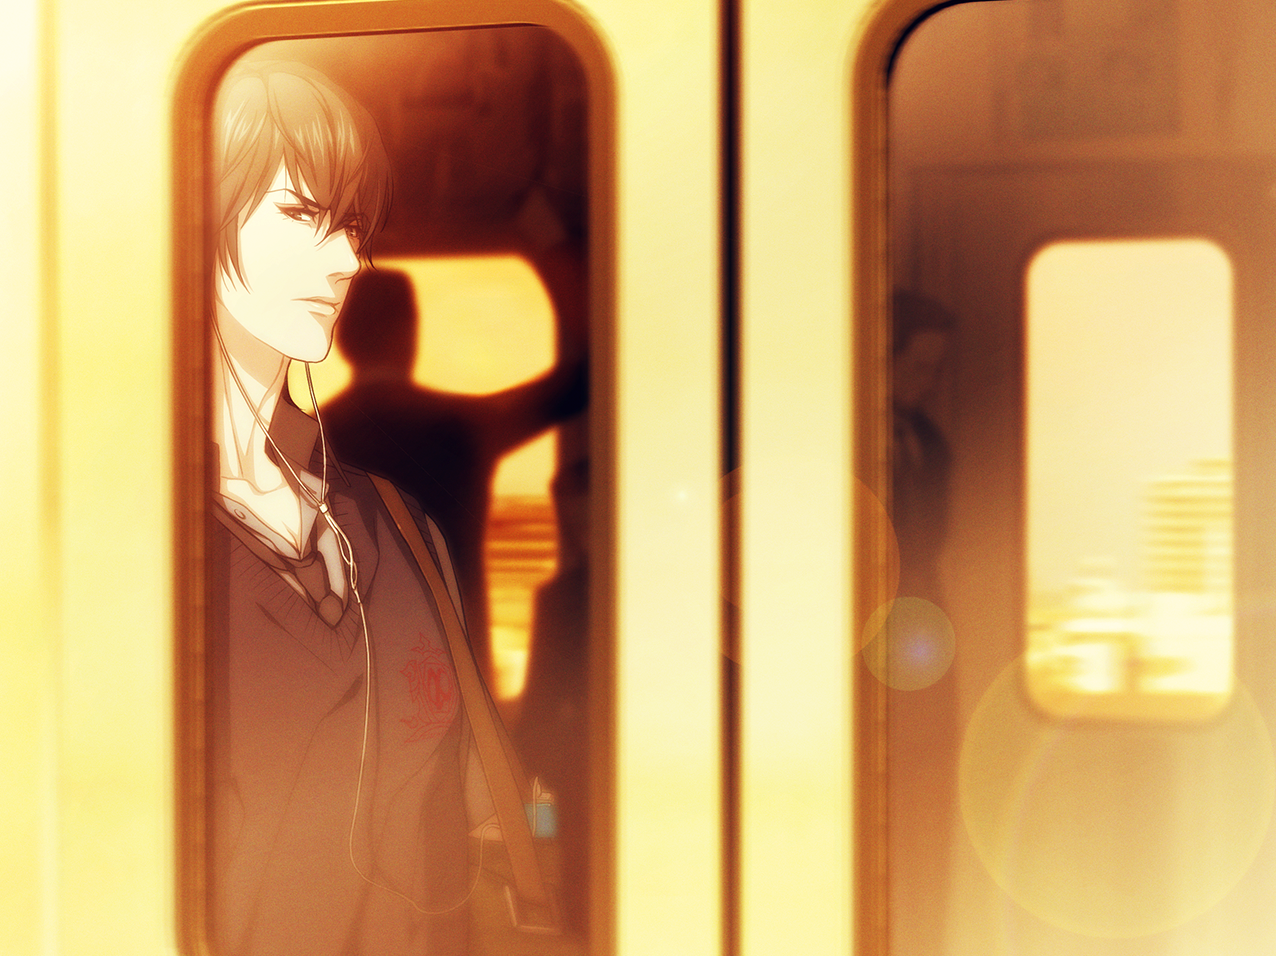 Youji rides the train home from school while listening to music.